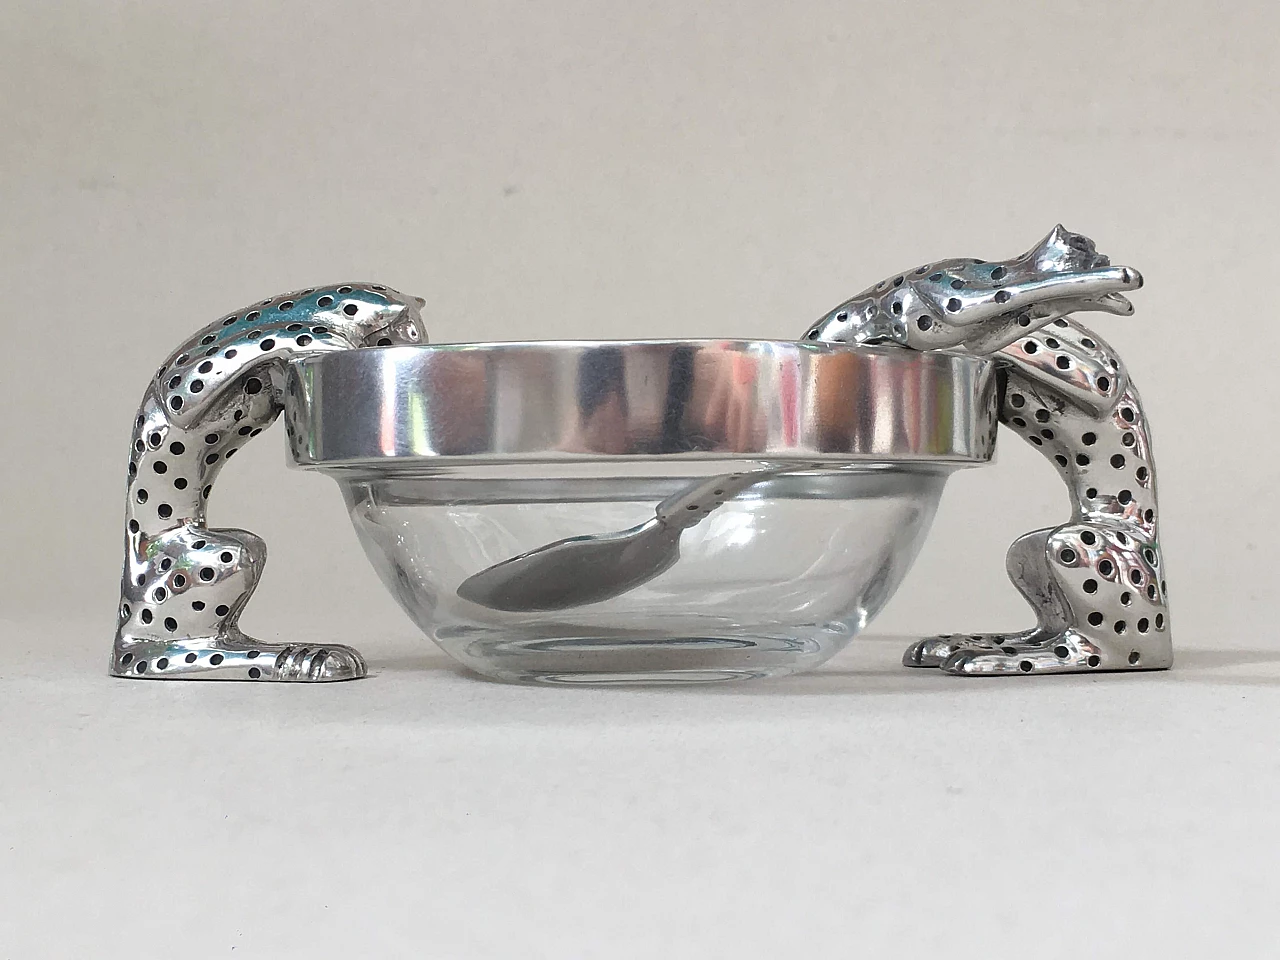 Glass and metal bowl and spoon with cheetahs 6